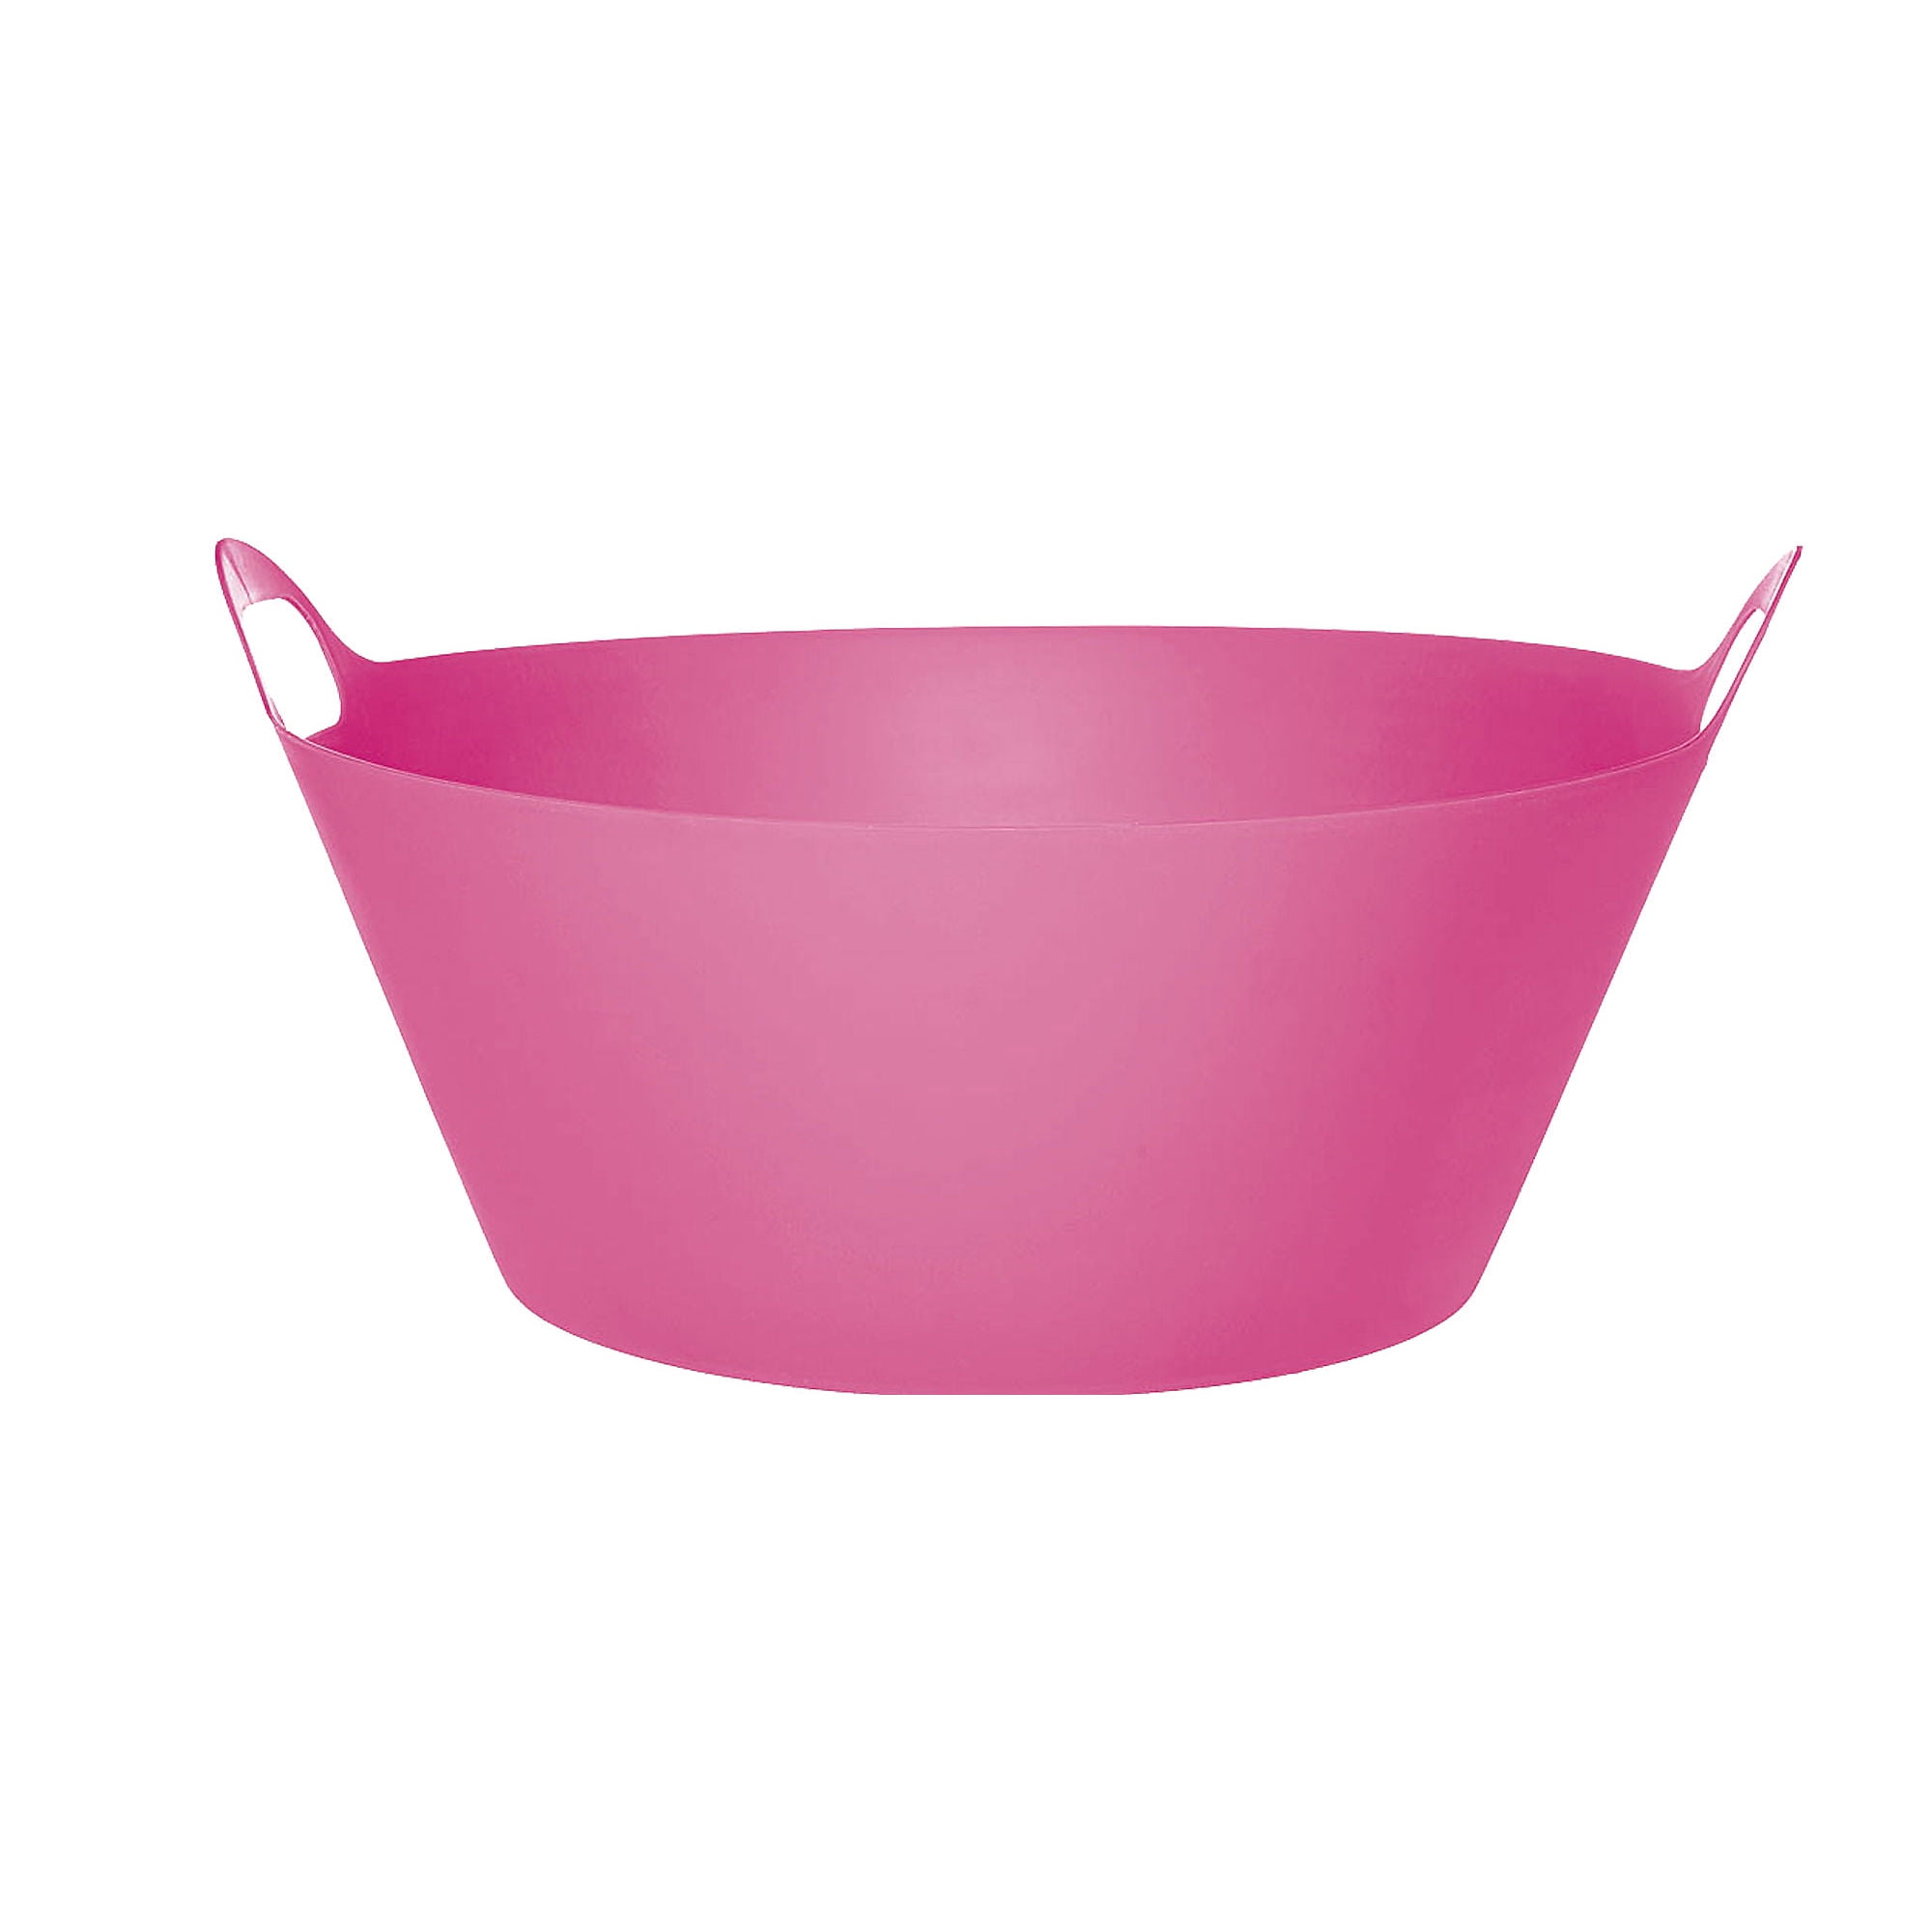 Hot Pink Round Plastic Party Tub 19in, Round Plastic Drink Tub